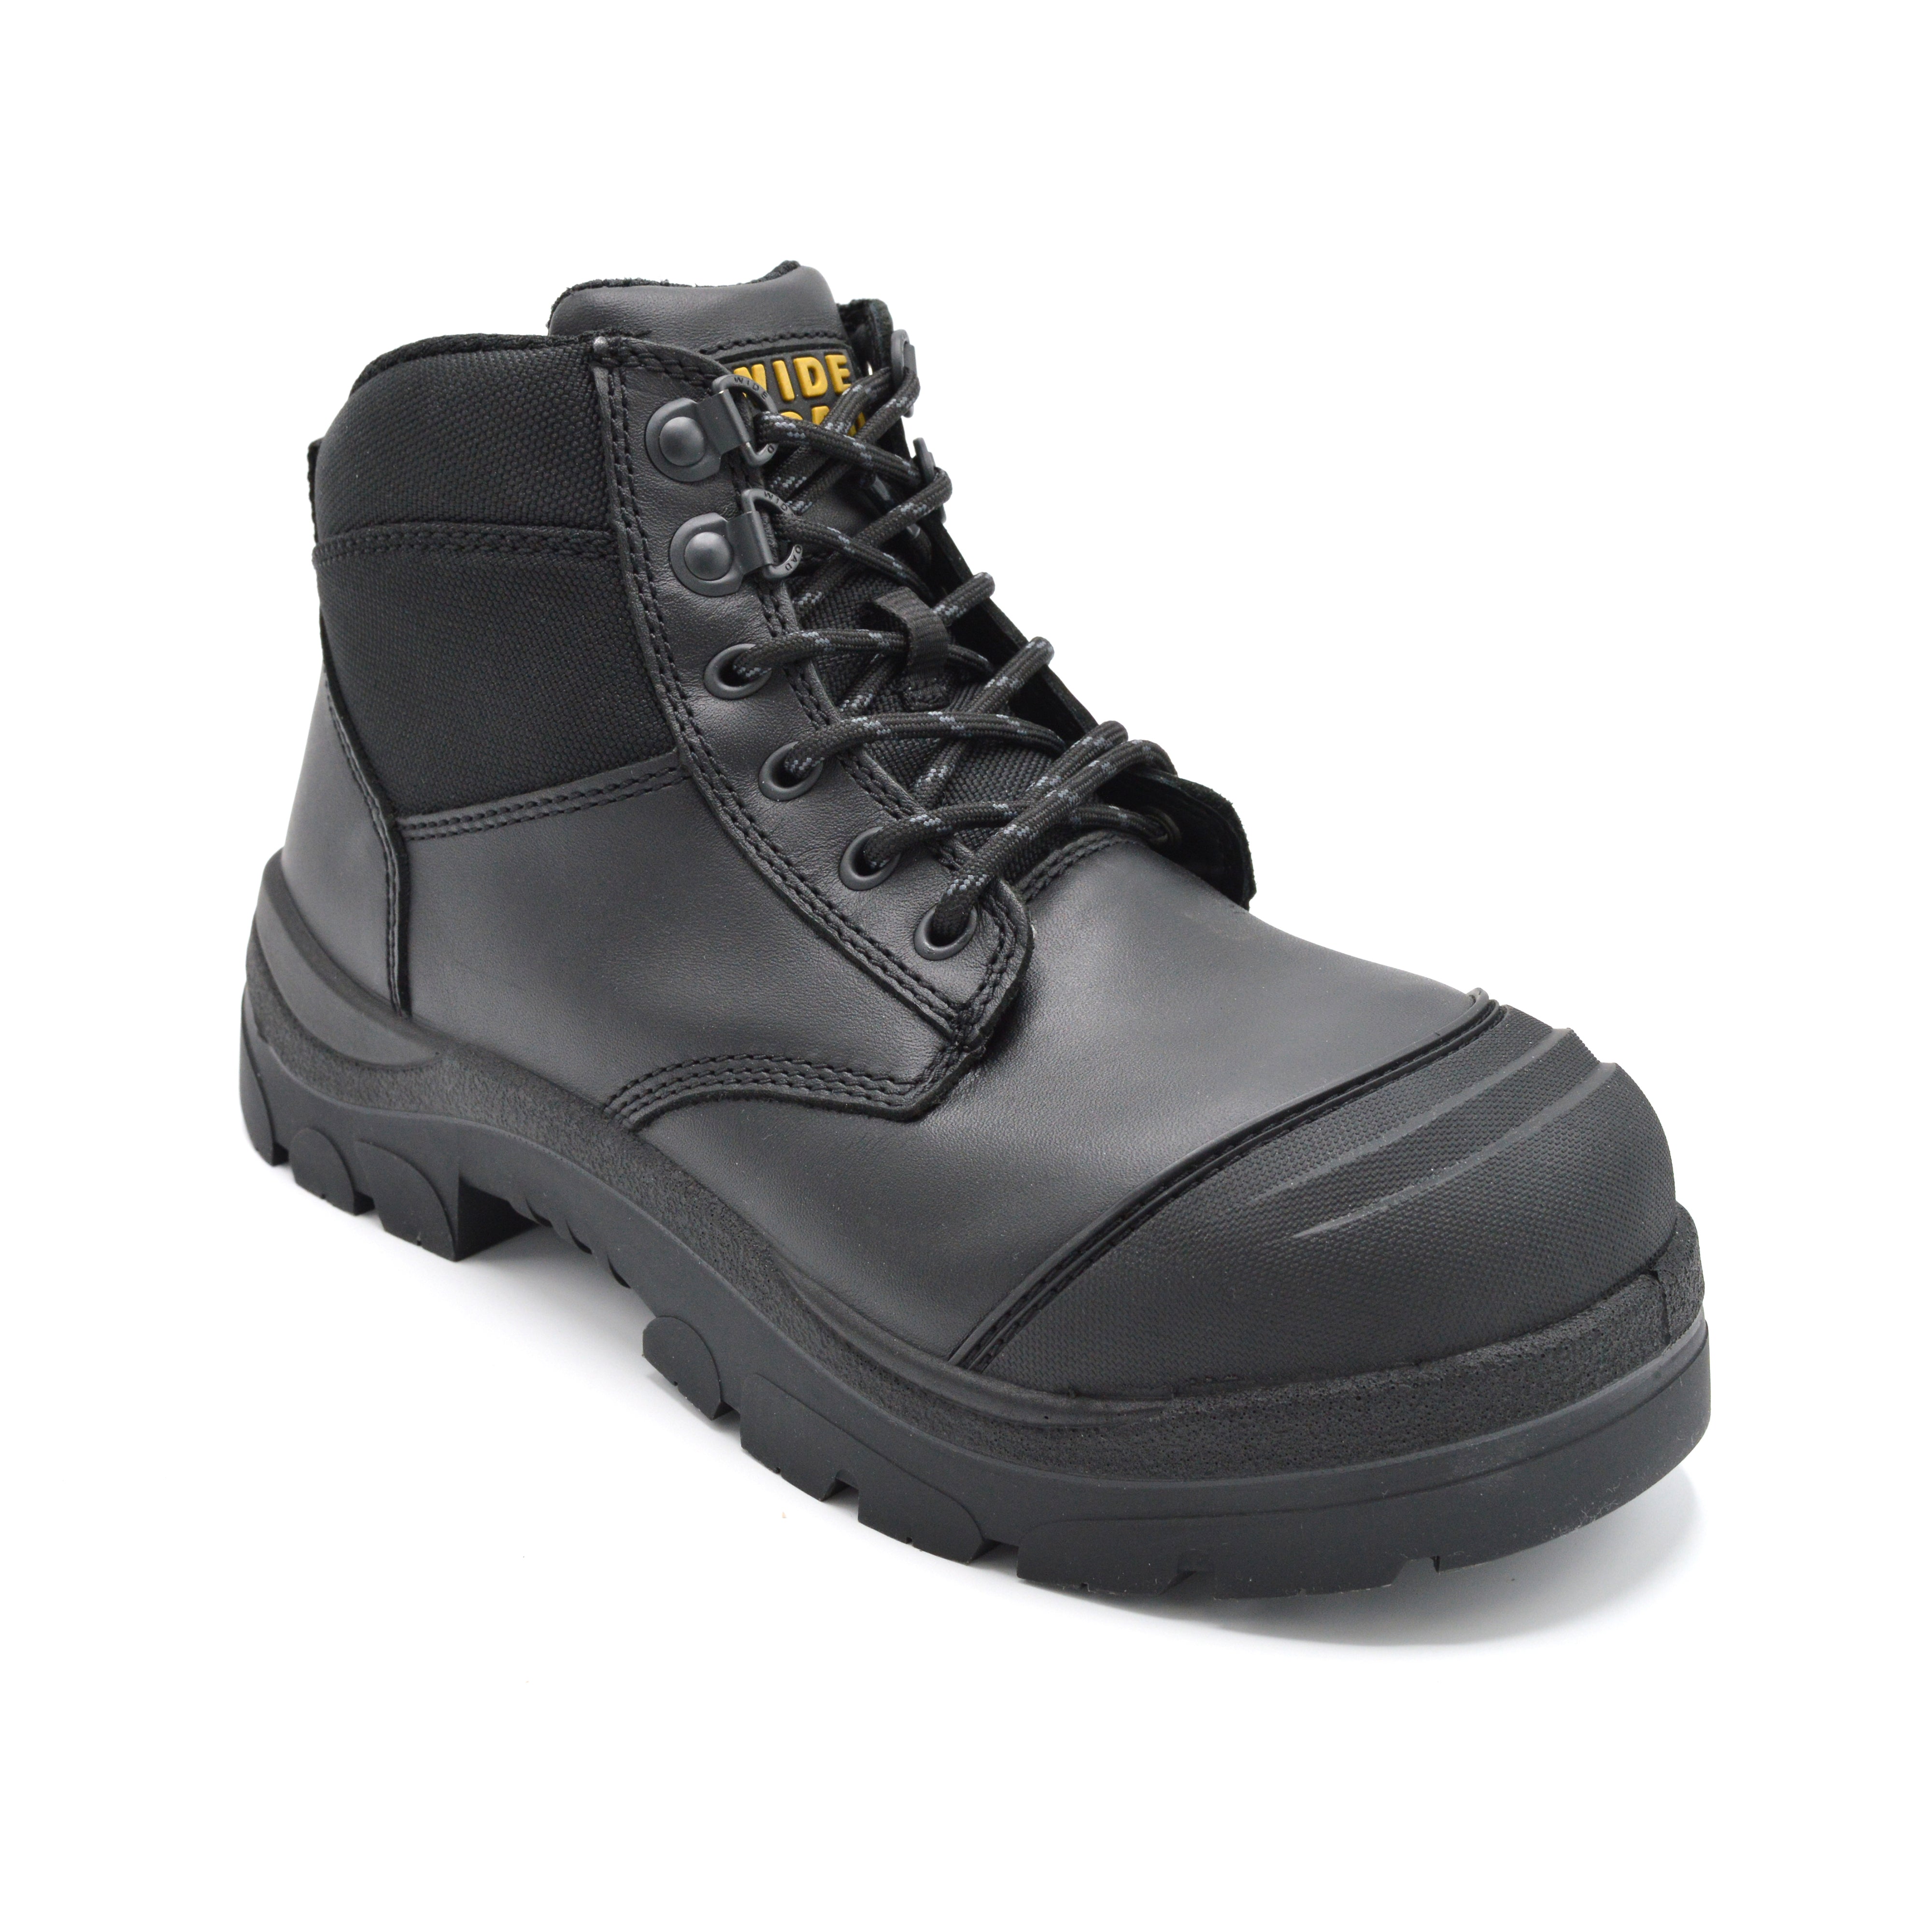 Men's Lace-up Safety Boots For Orthotics